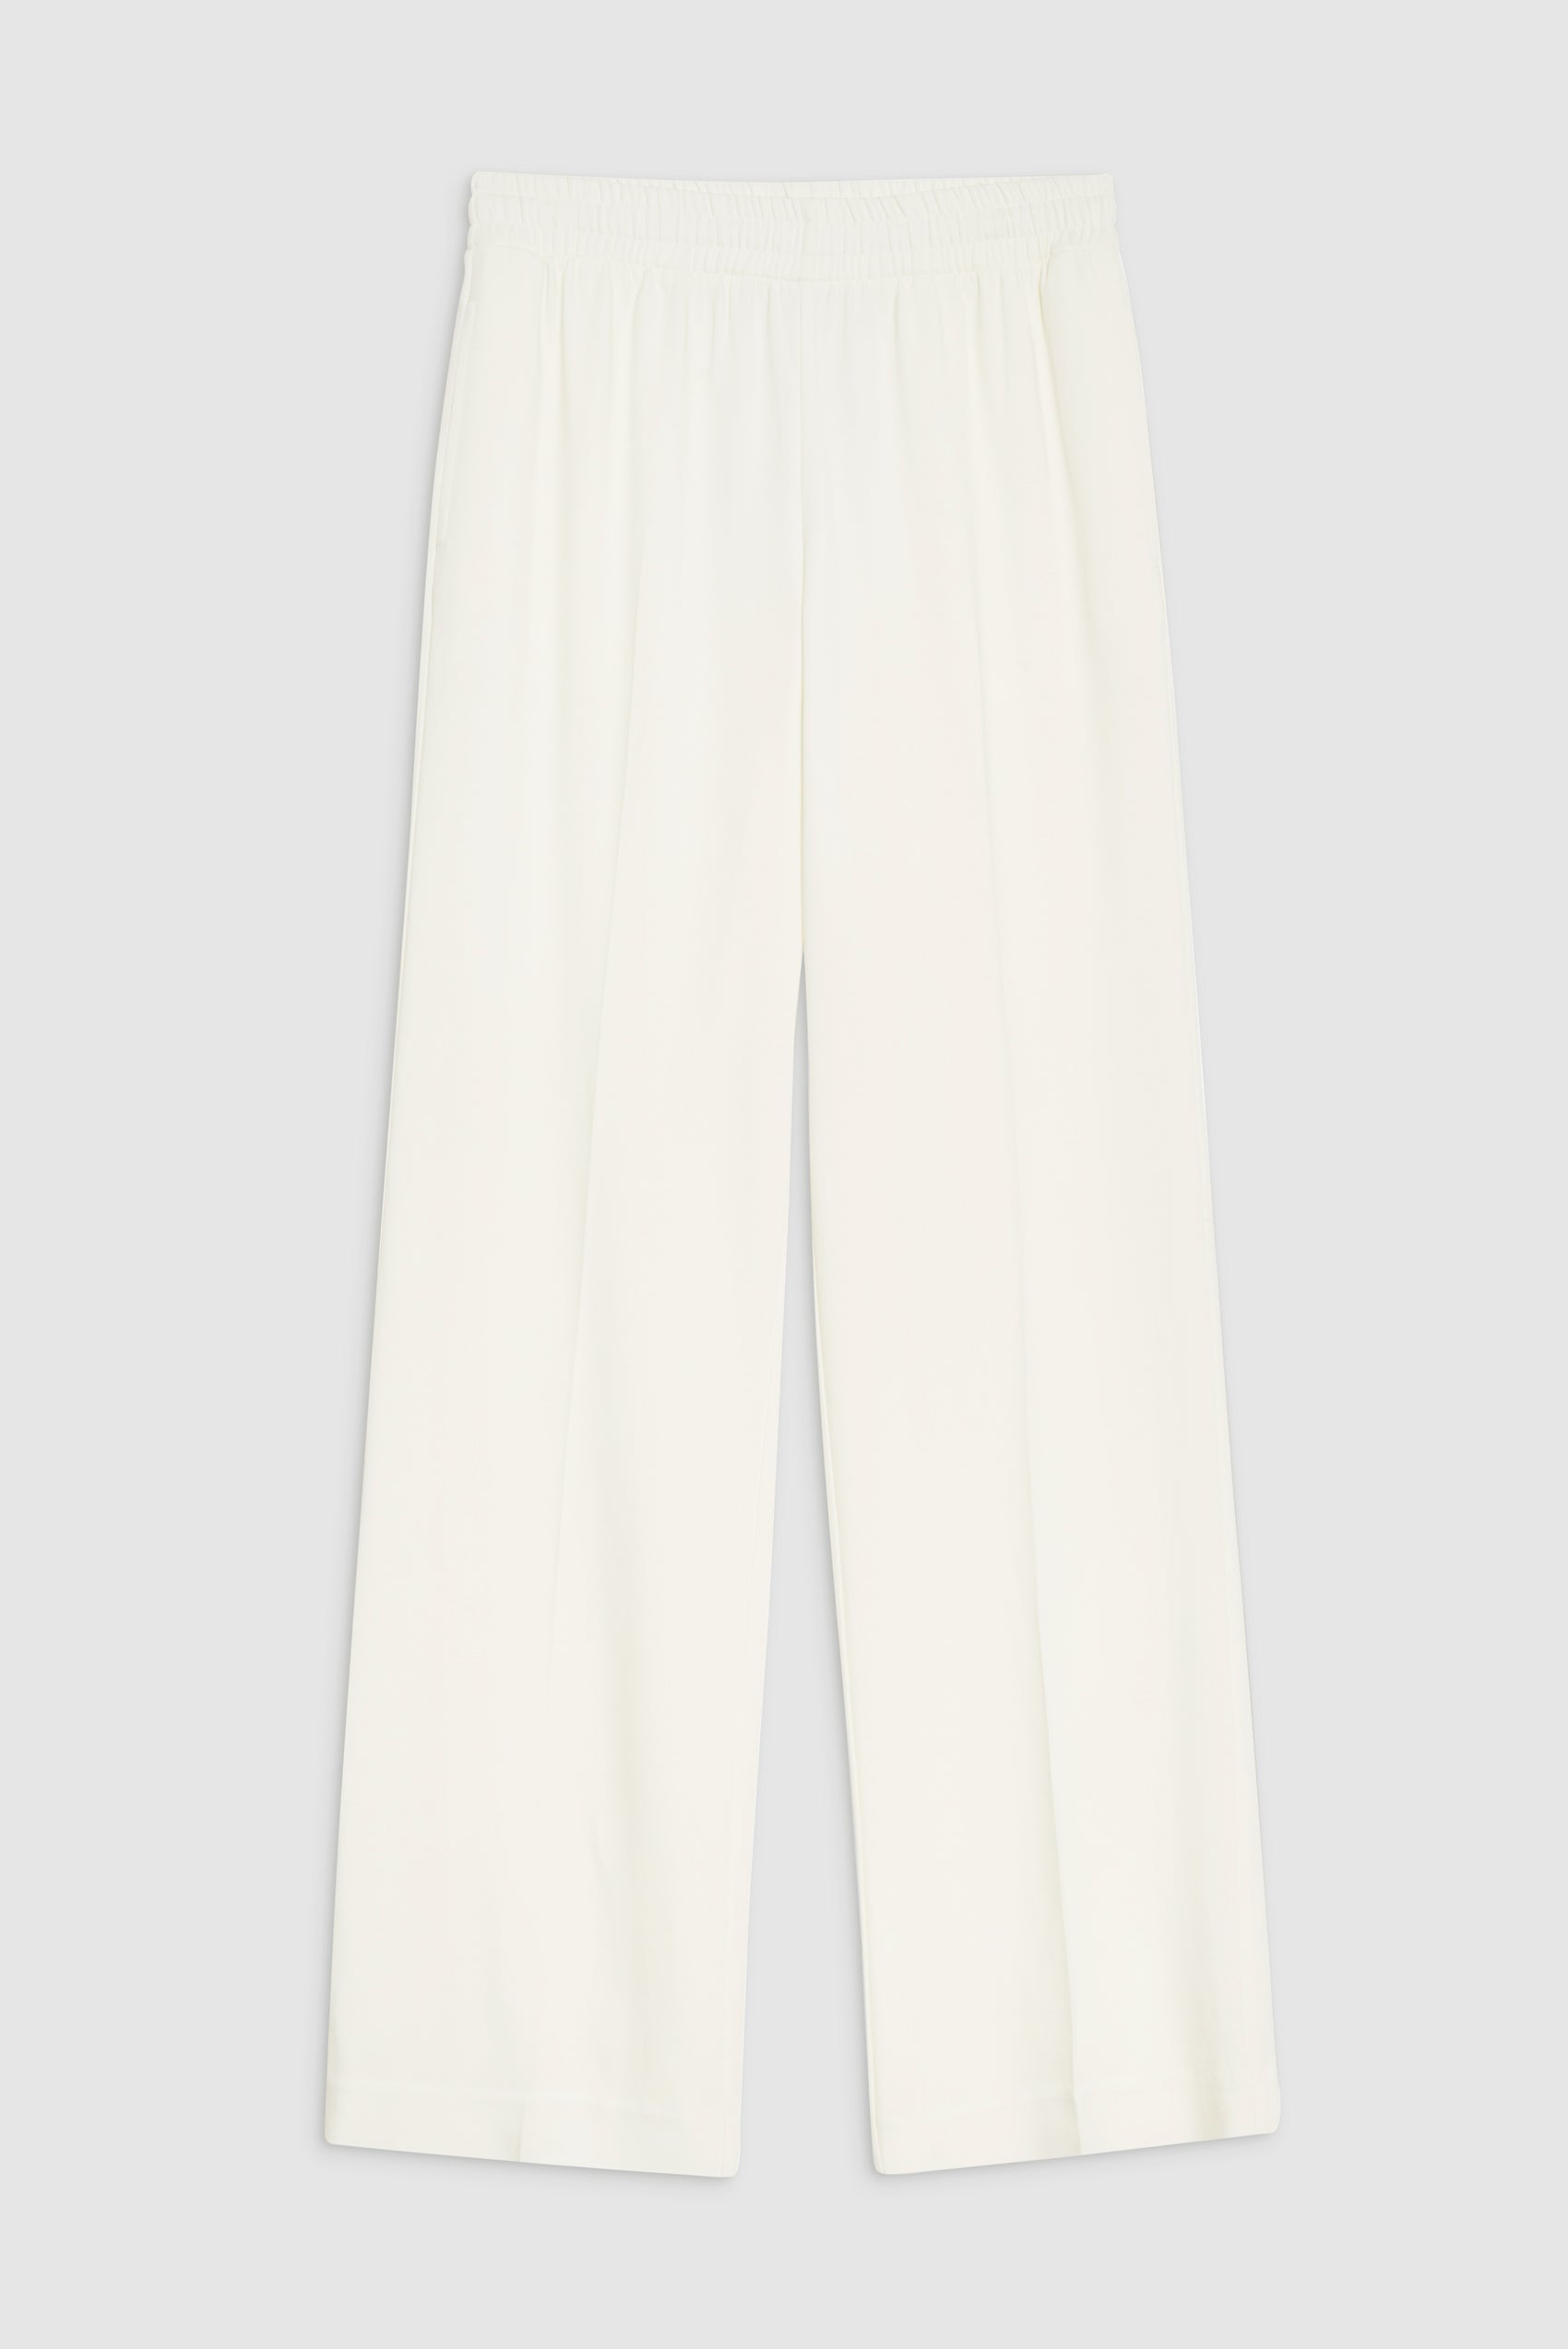 ANINE BING Soto Pant - Ivory - Front View